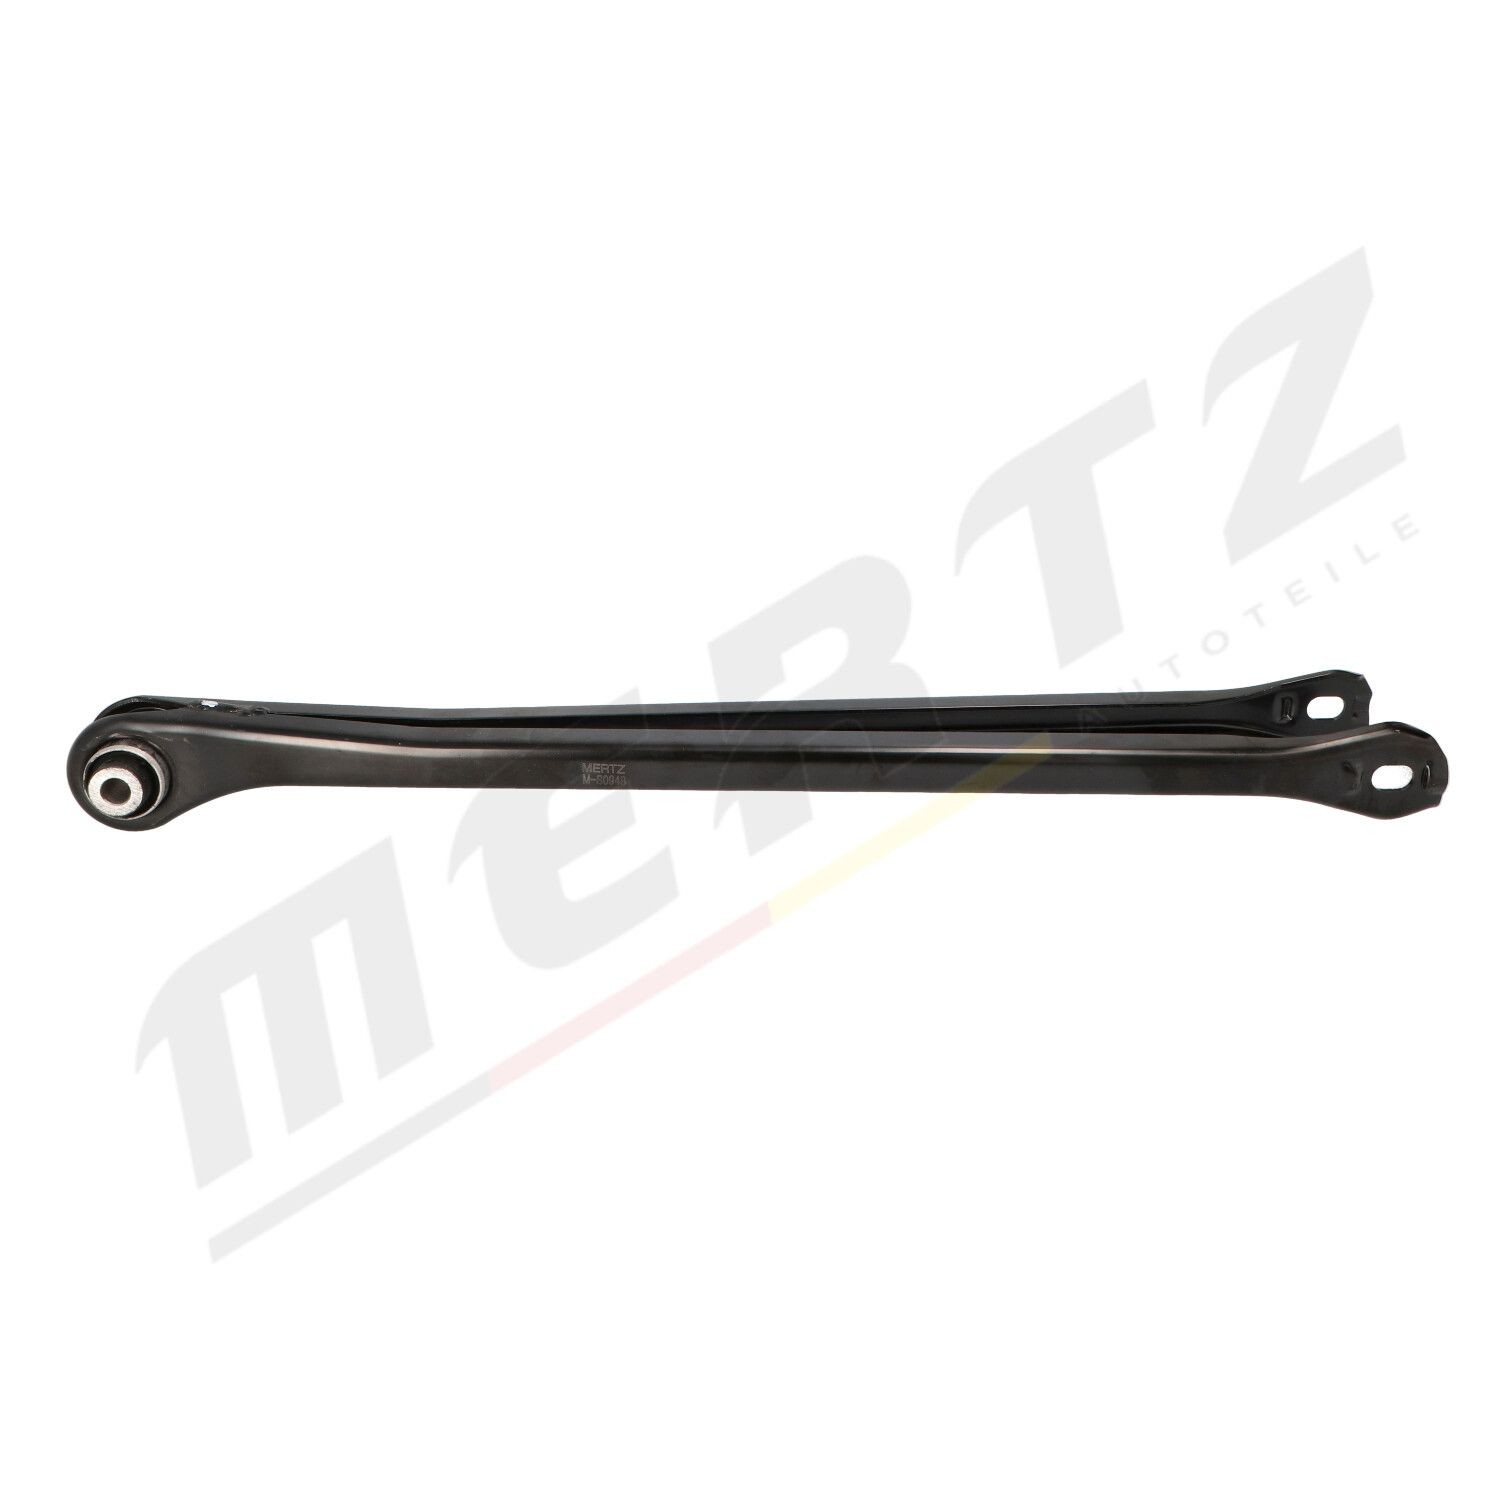 Suspension arm MERTZ with bearing(s), Rear Axle Left, Rear Axle Right, Lower, Control Arm, Sheet Steel - M-S0948